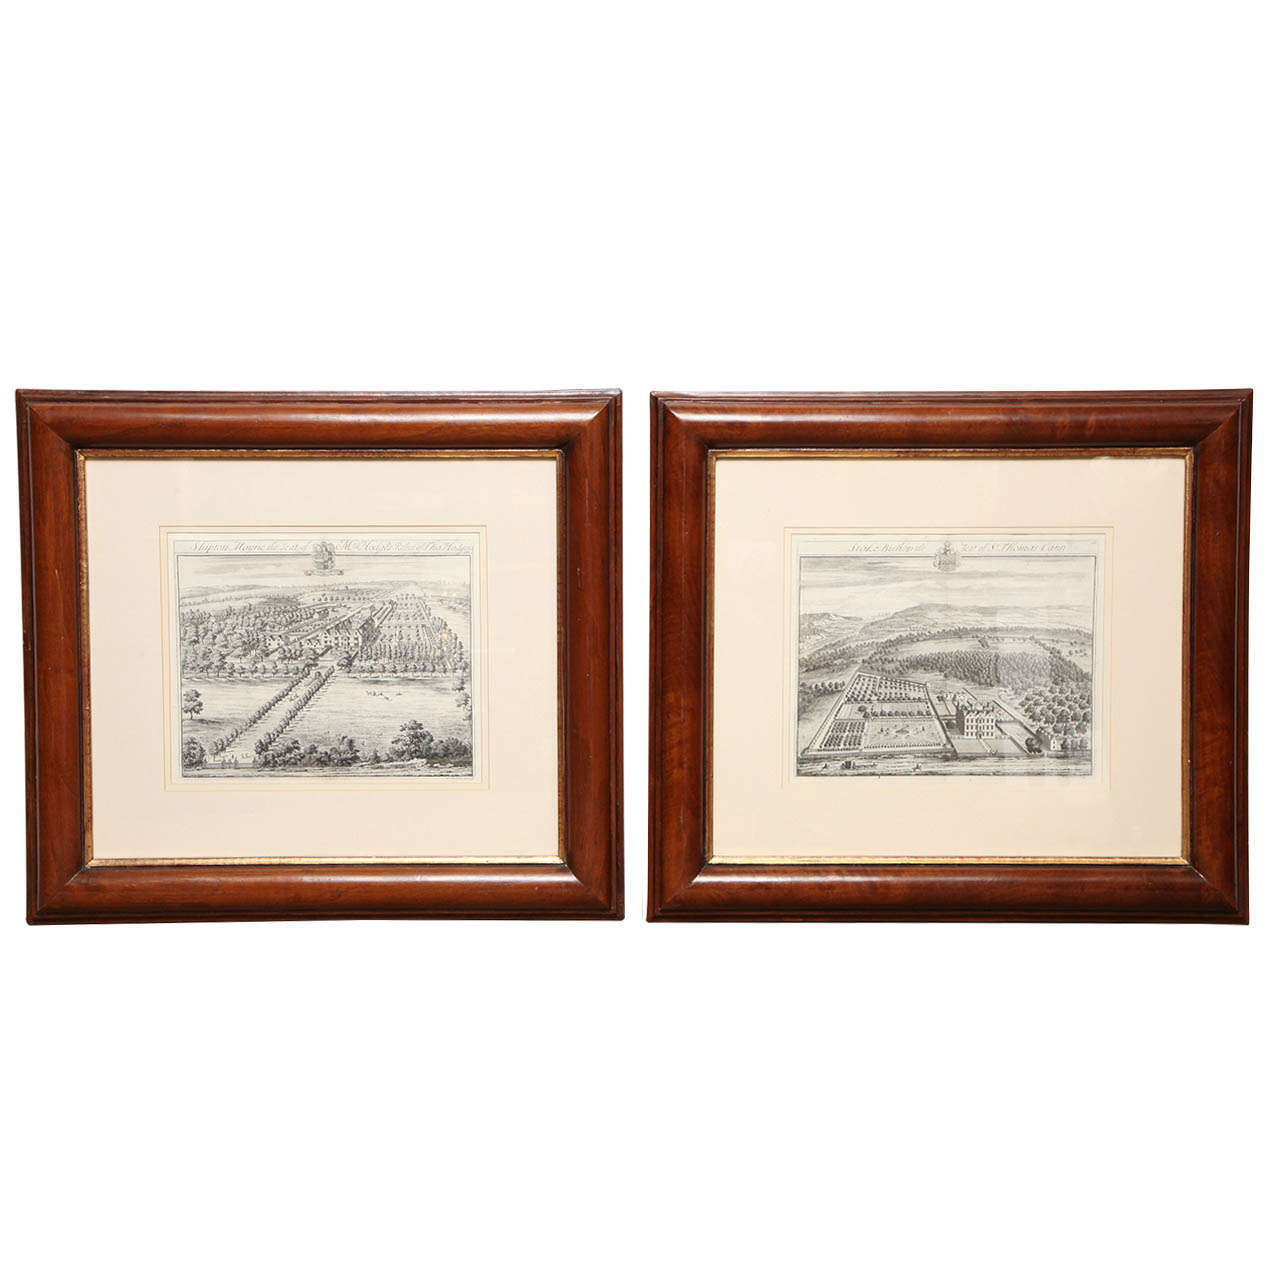 Two late 18th Century English Engravings of Country House Views